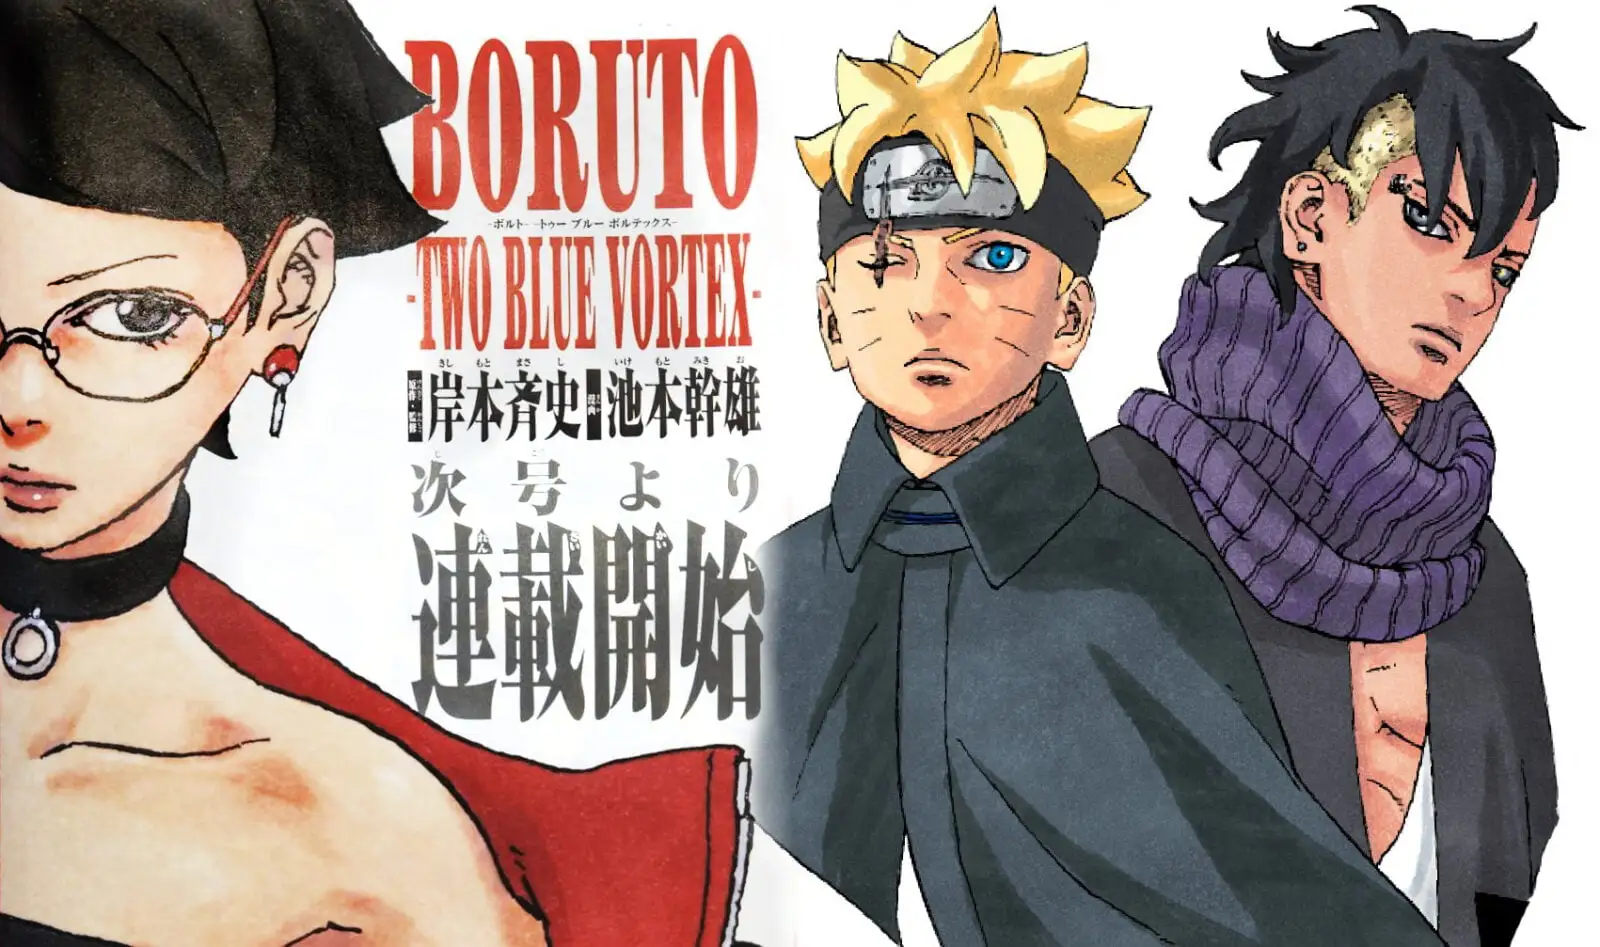 Boruto Two Blue Vortex Chapter 3 Achieves Milestone Views in Just 2 Days -  Check Now - The Trendy Story